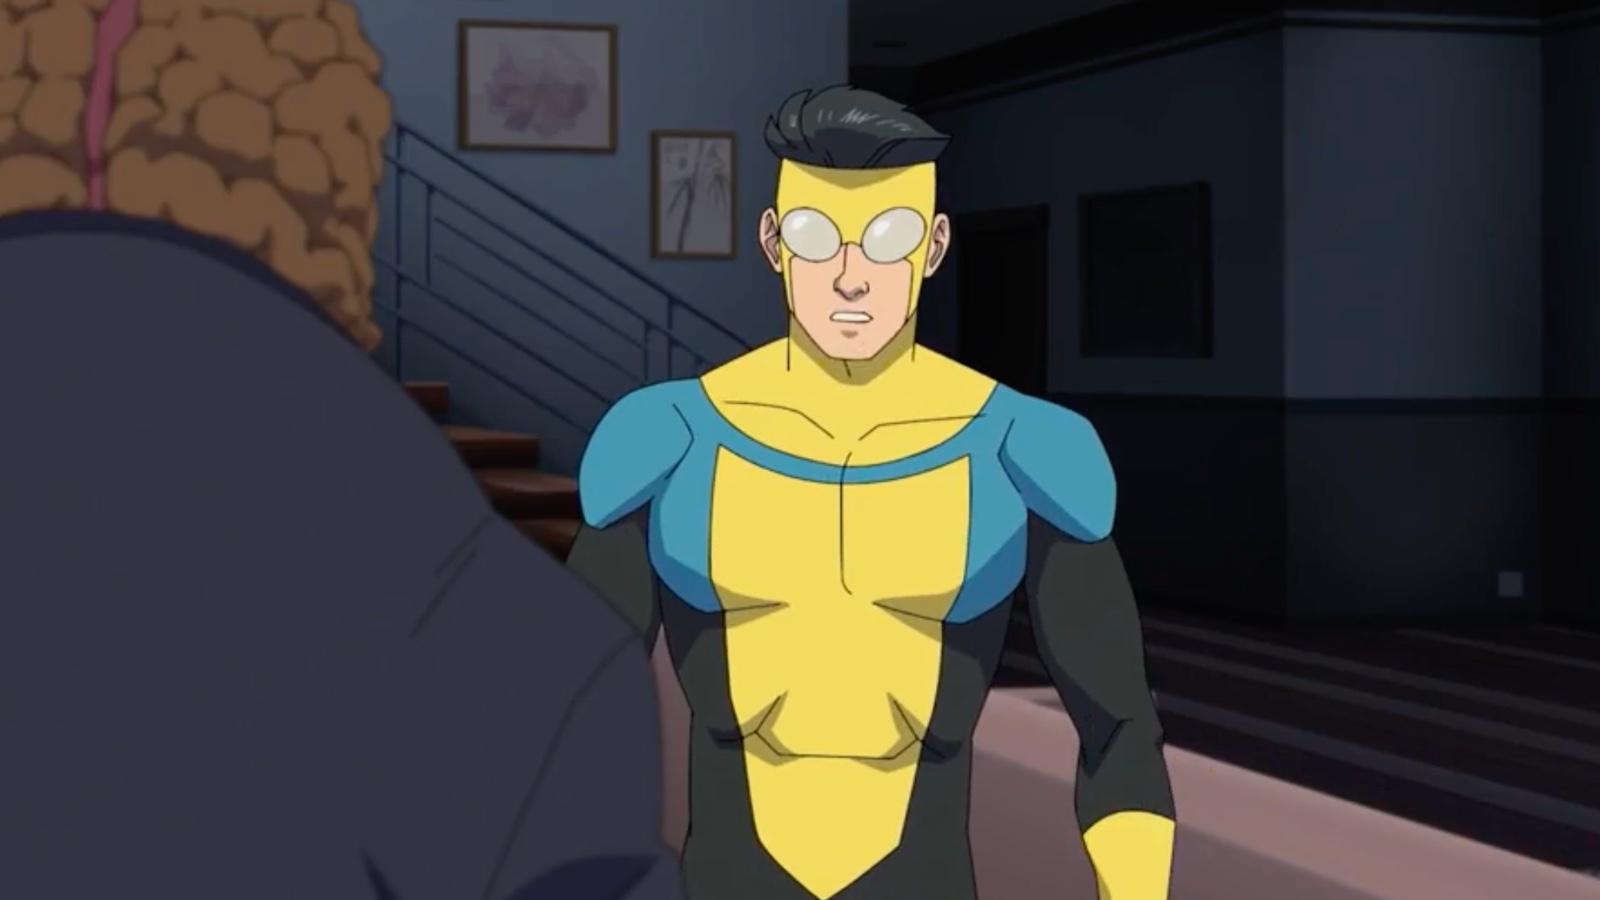 Mark and Levy in Invincible Season 2 Episode 8.